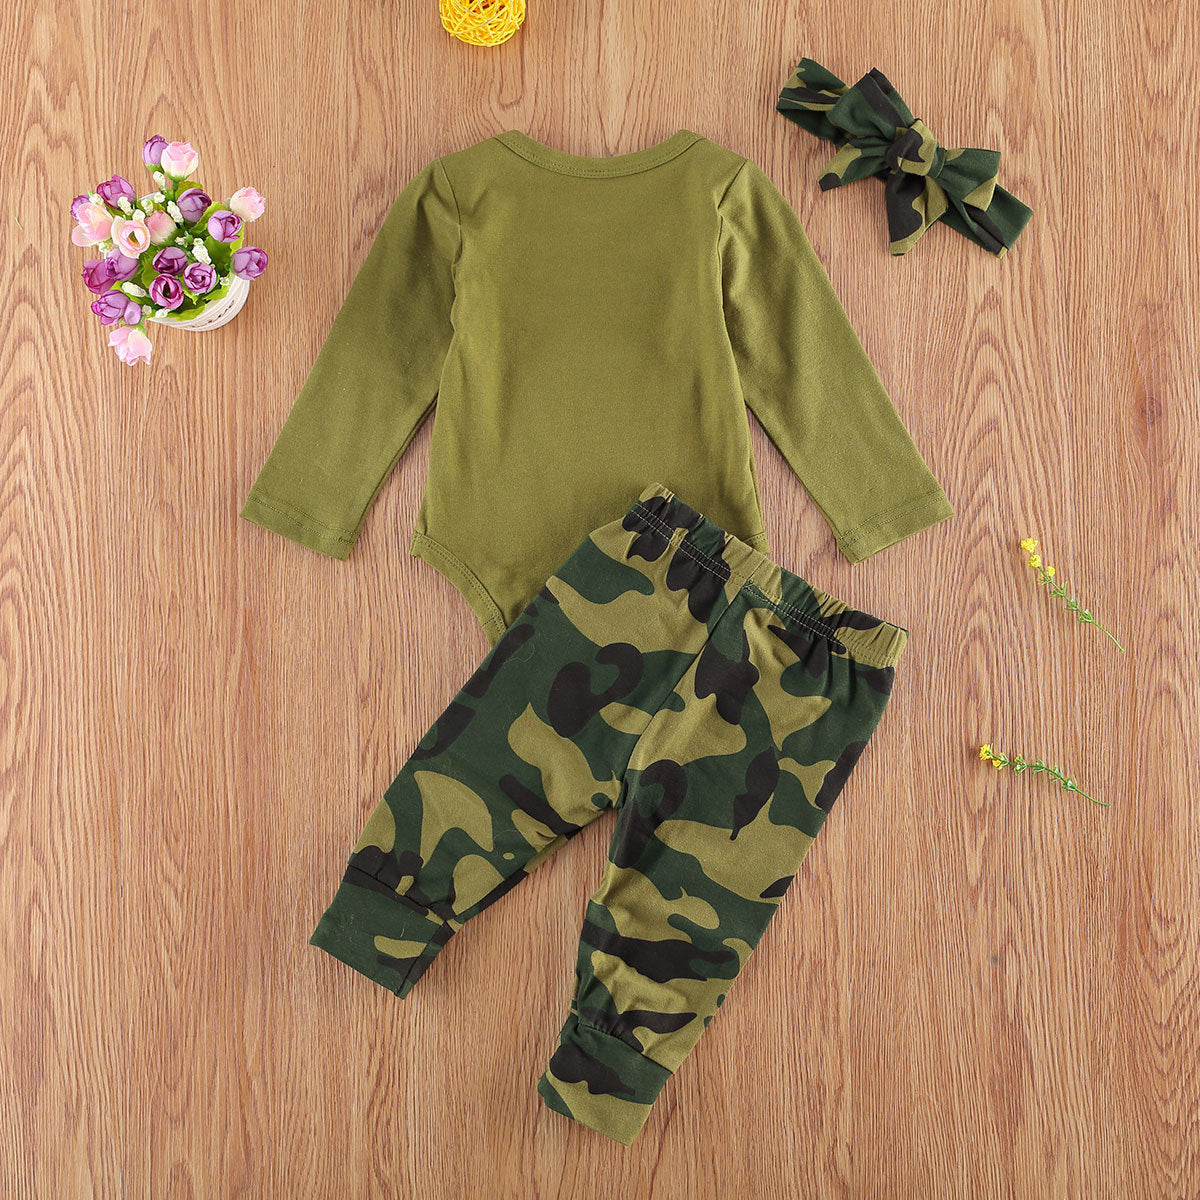 Baby's Camouflage Printed Clothing Set